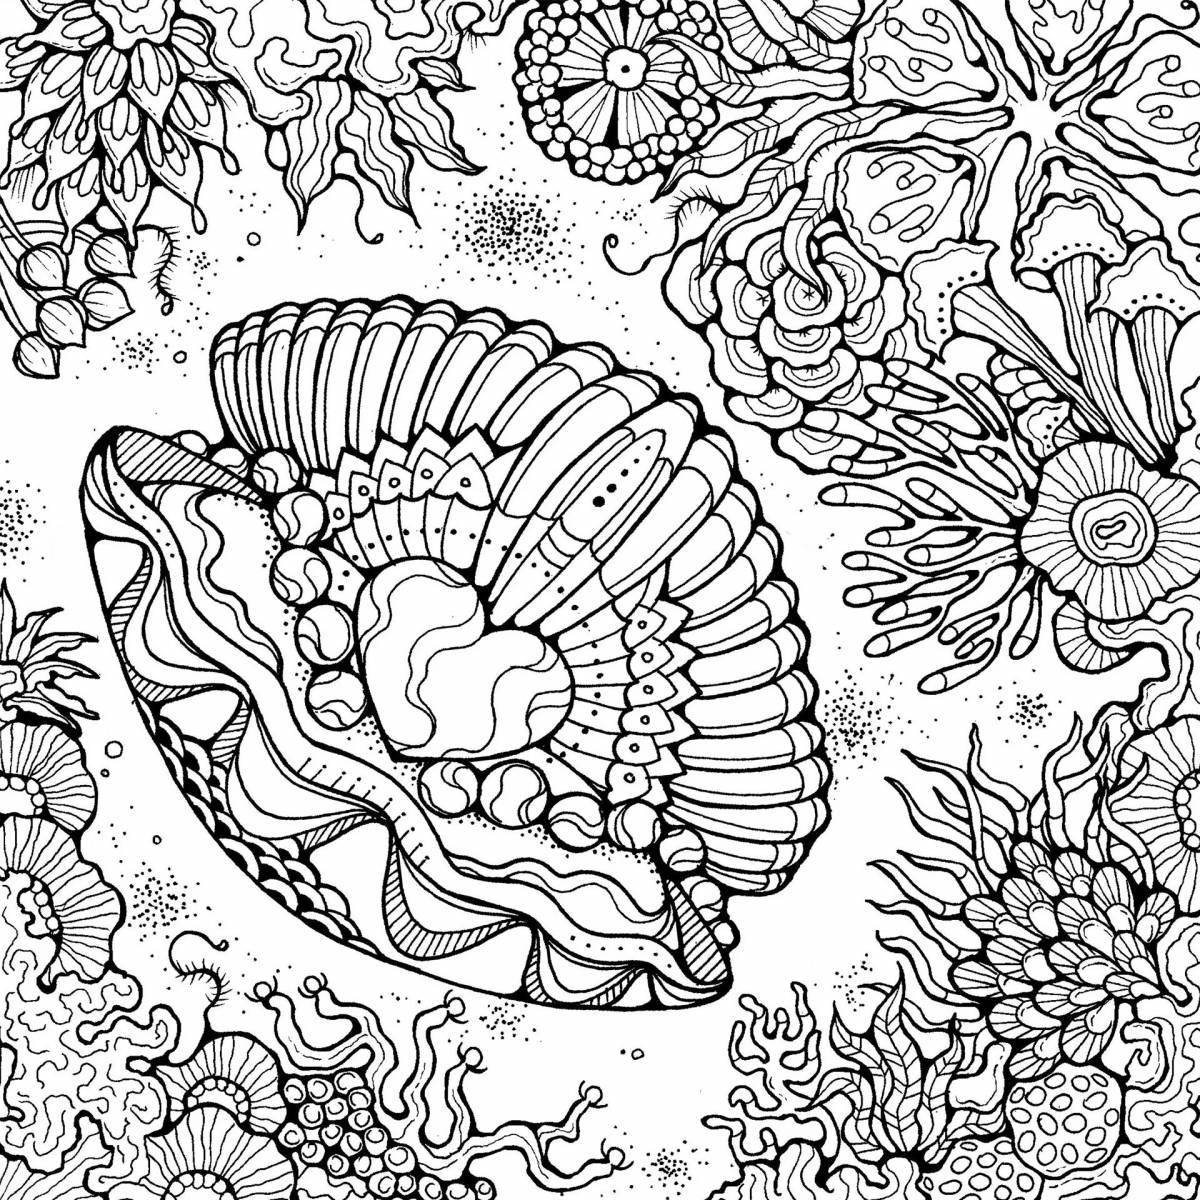 Refreshing coloring book for meditation and relaxation